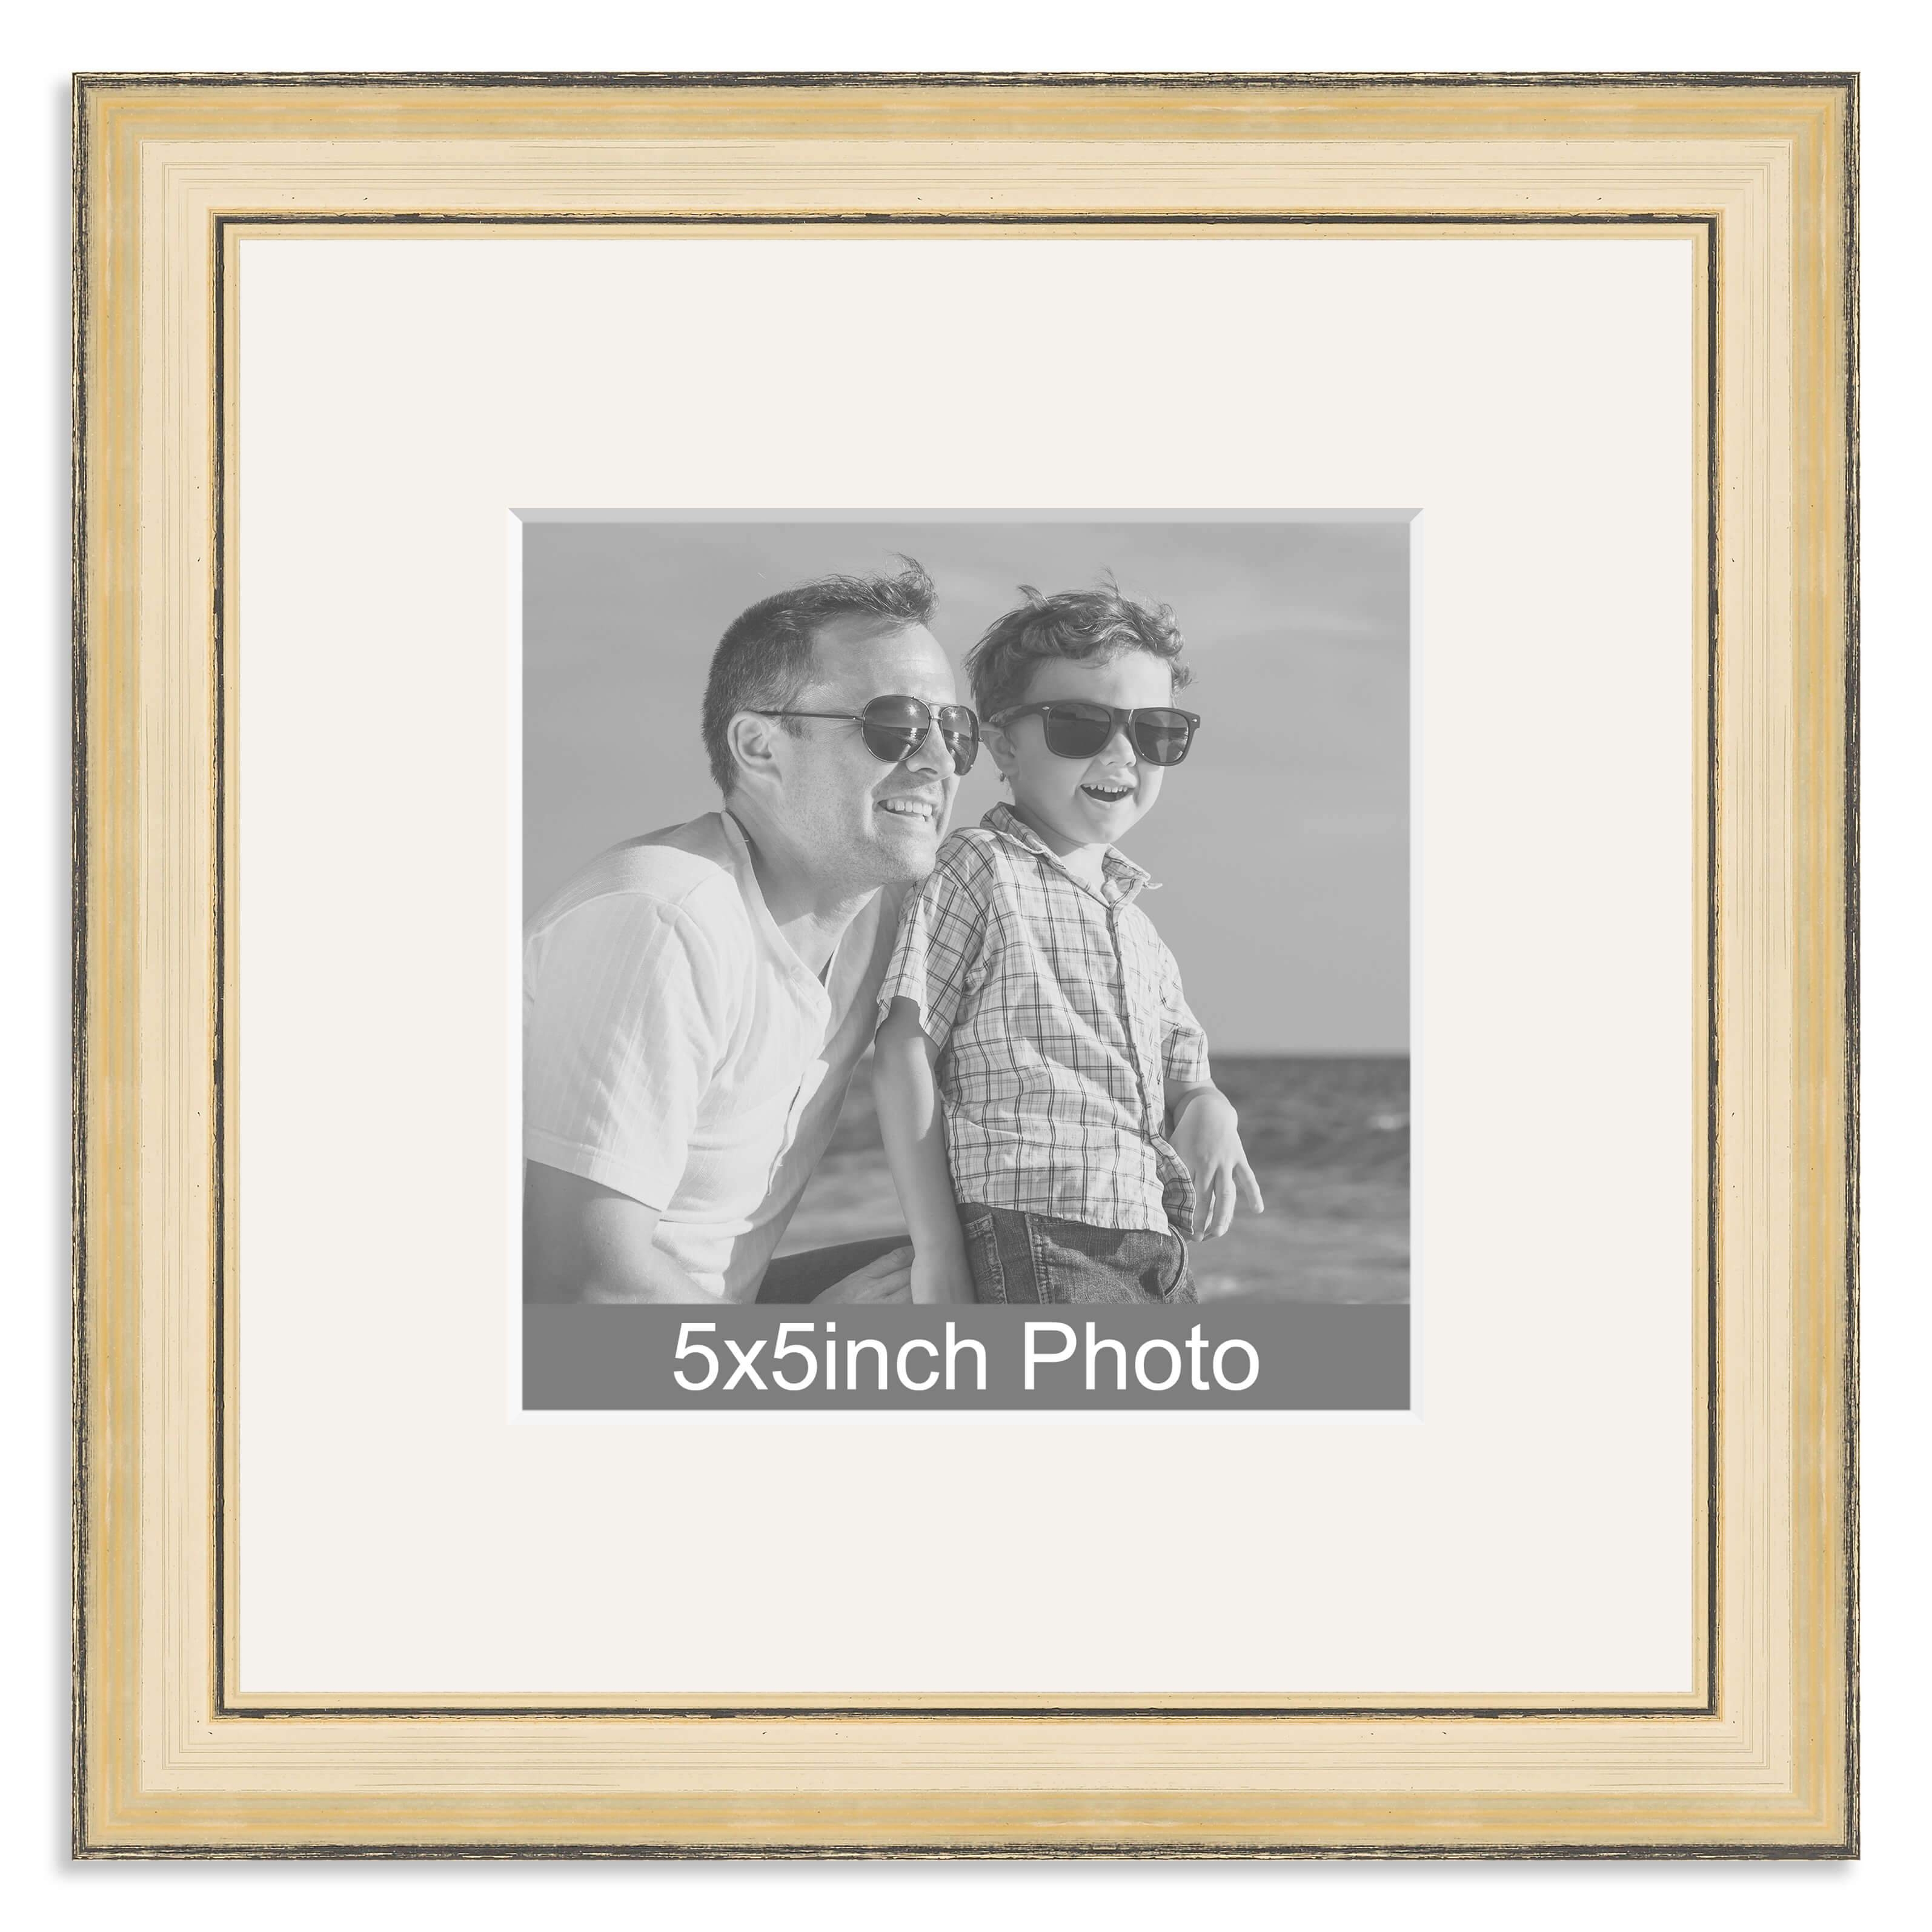 Gold Wooden Photo Frame with mount for a 5x5in Photo – No Photo required